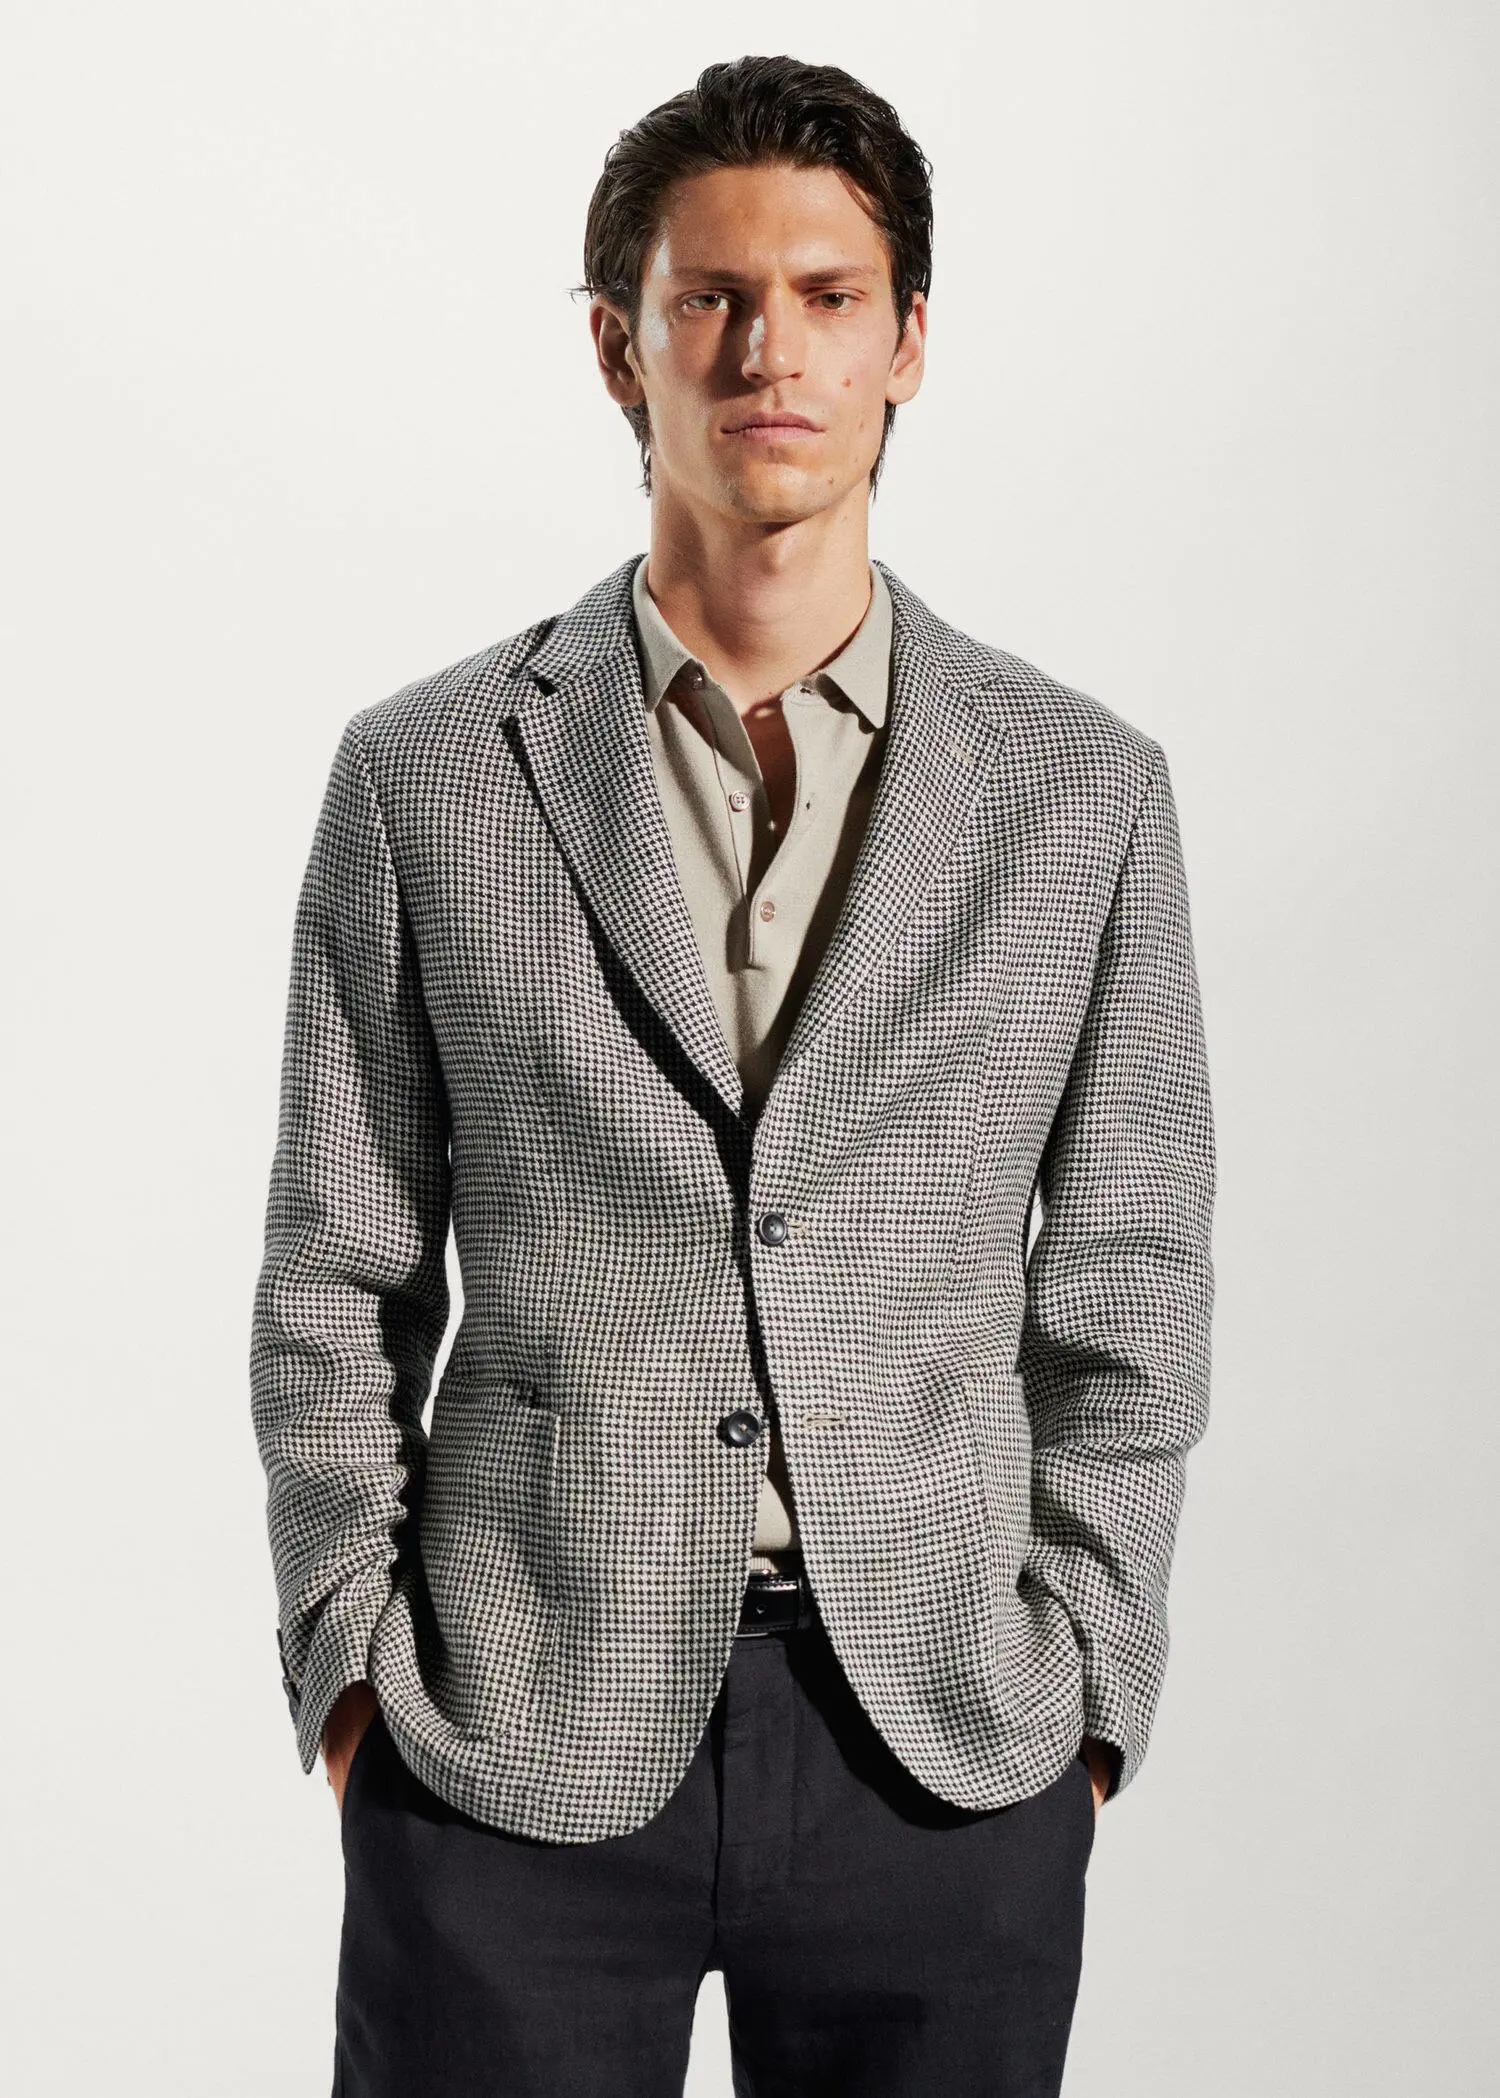 Mango 100% linen micro-houndstooth jacket. a man wearing a jacket and a tie. 